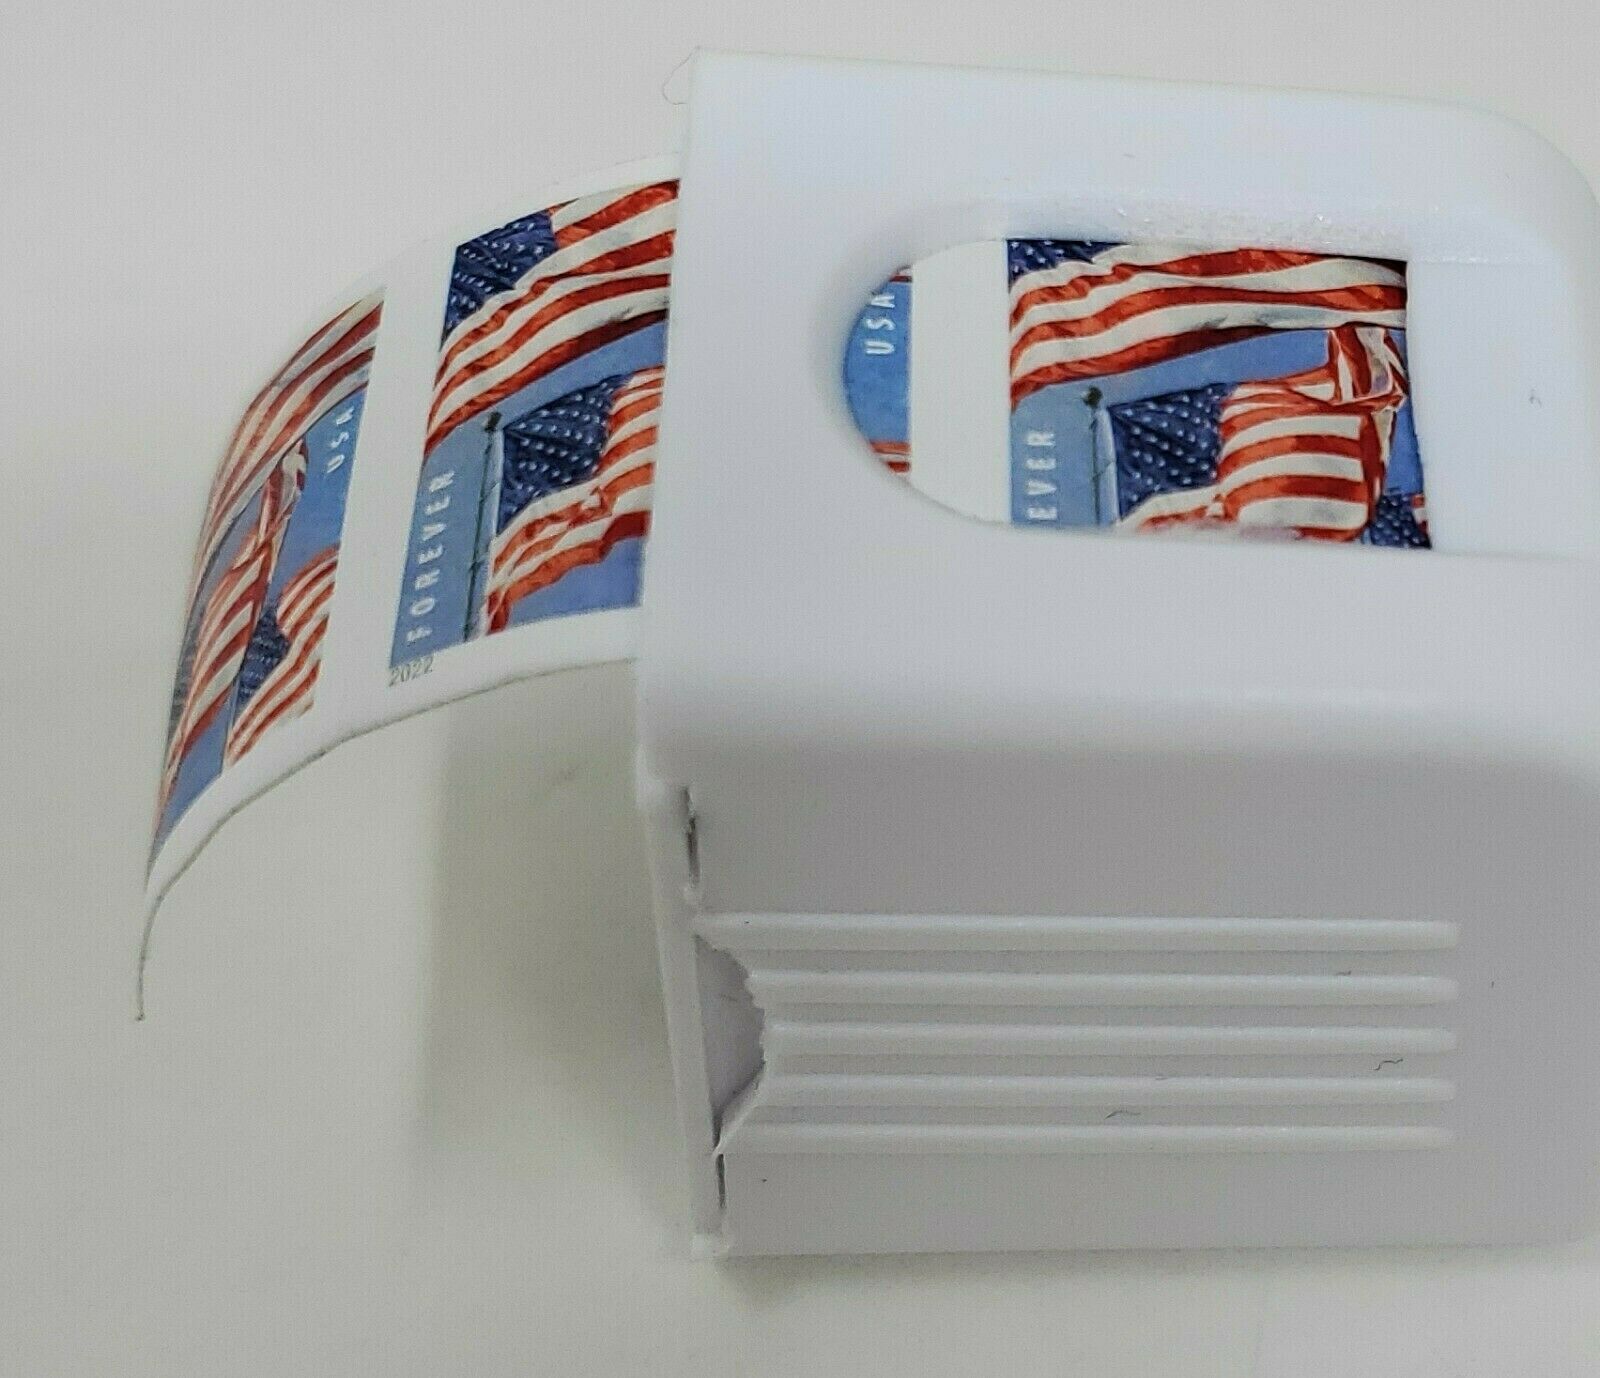 Overhalfsale.com: 🇺🇸USPS Forever Stamps Roll of 100 Only $37.99🇺🇸